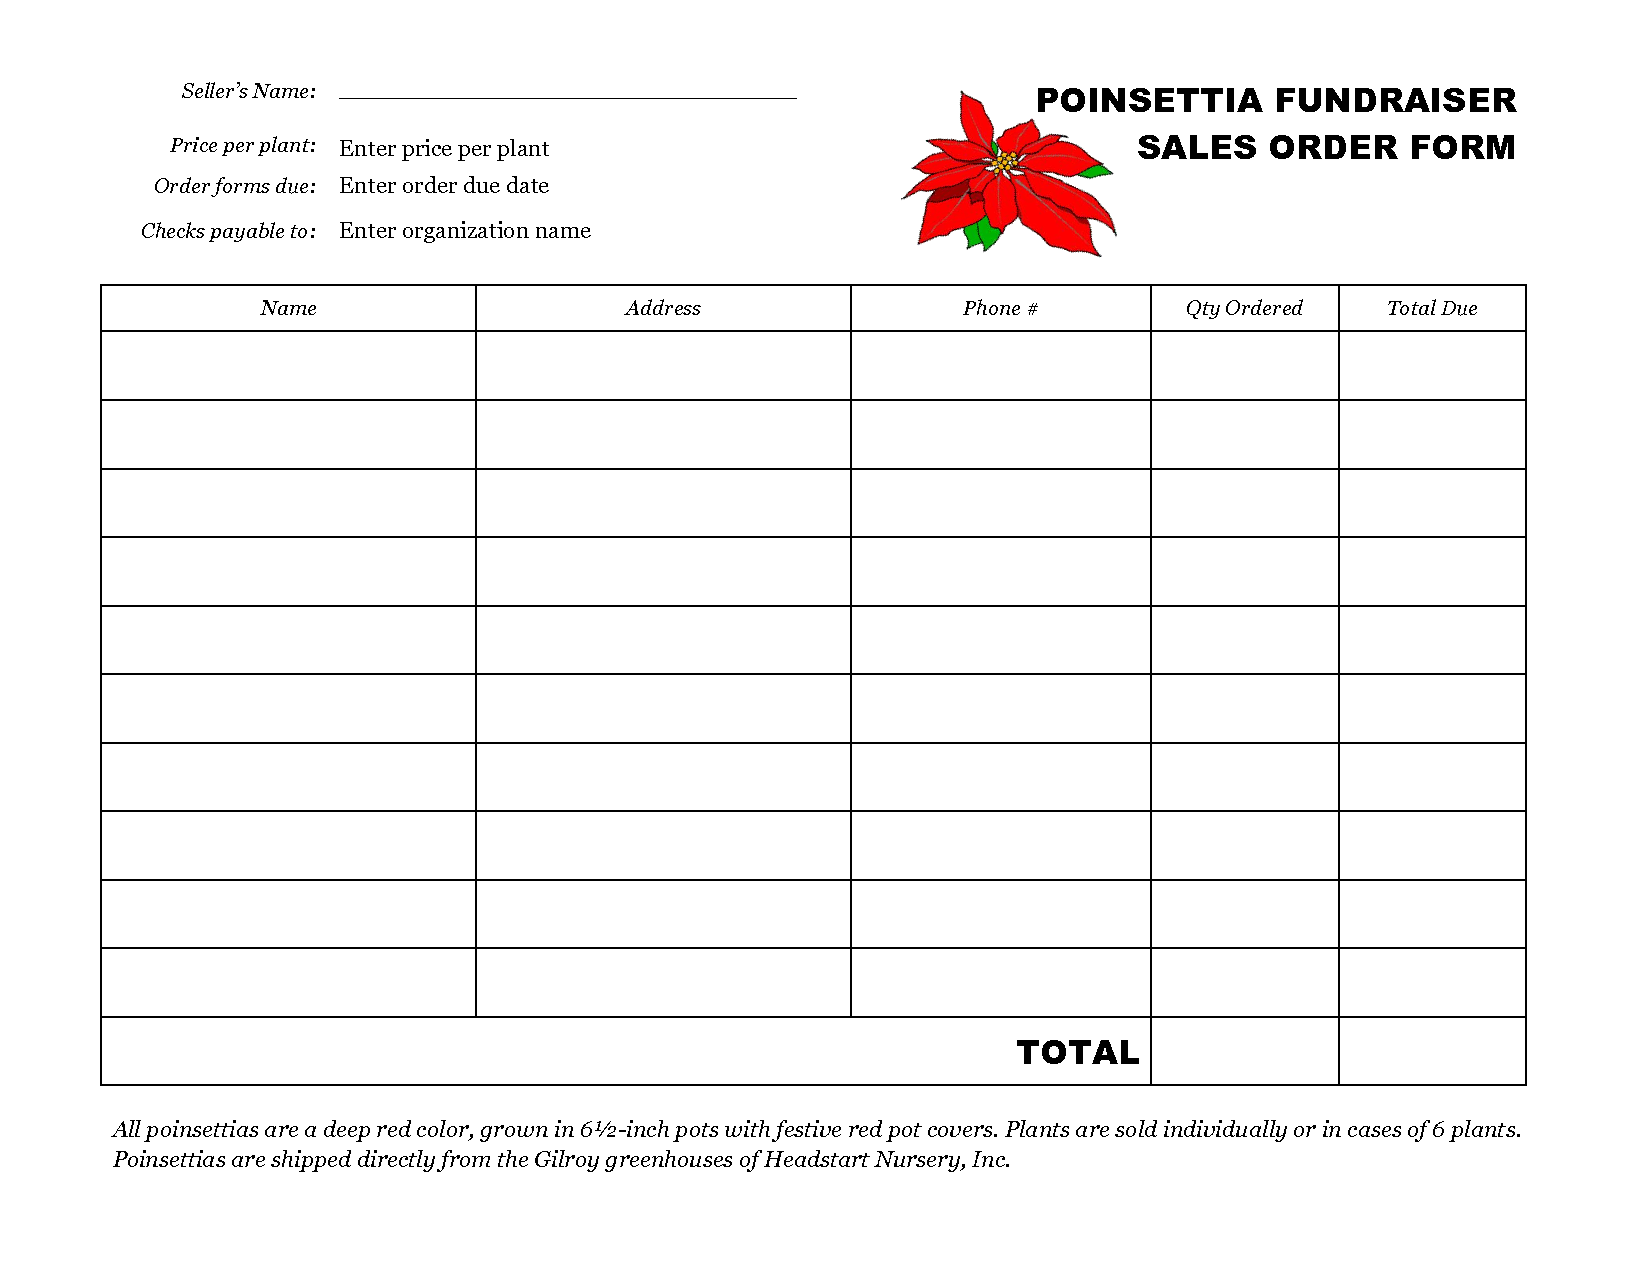 Fundraiser Order Form Template